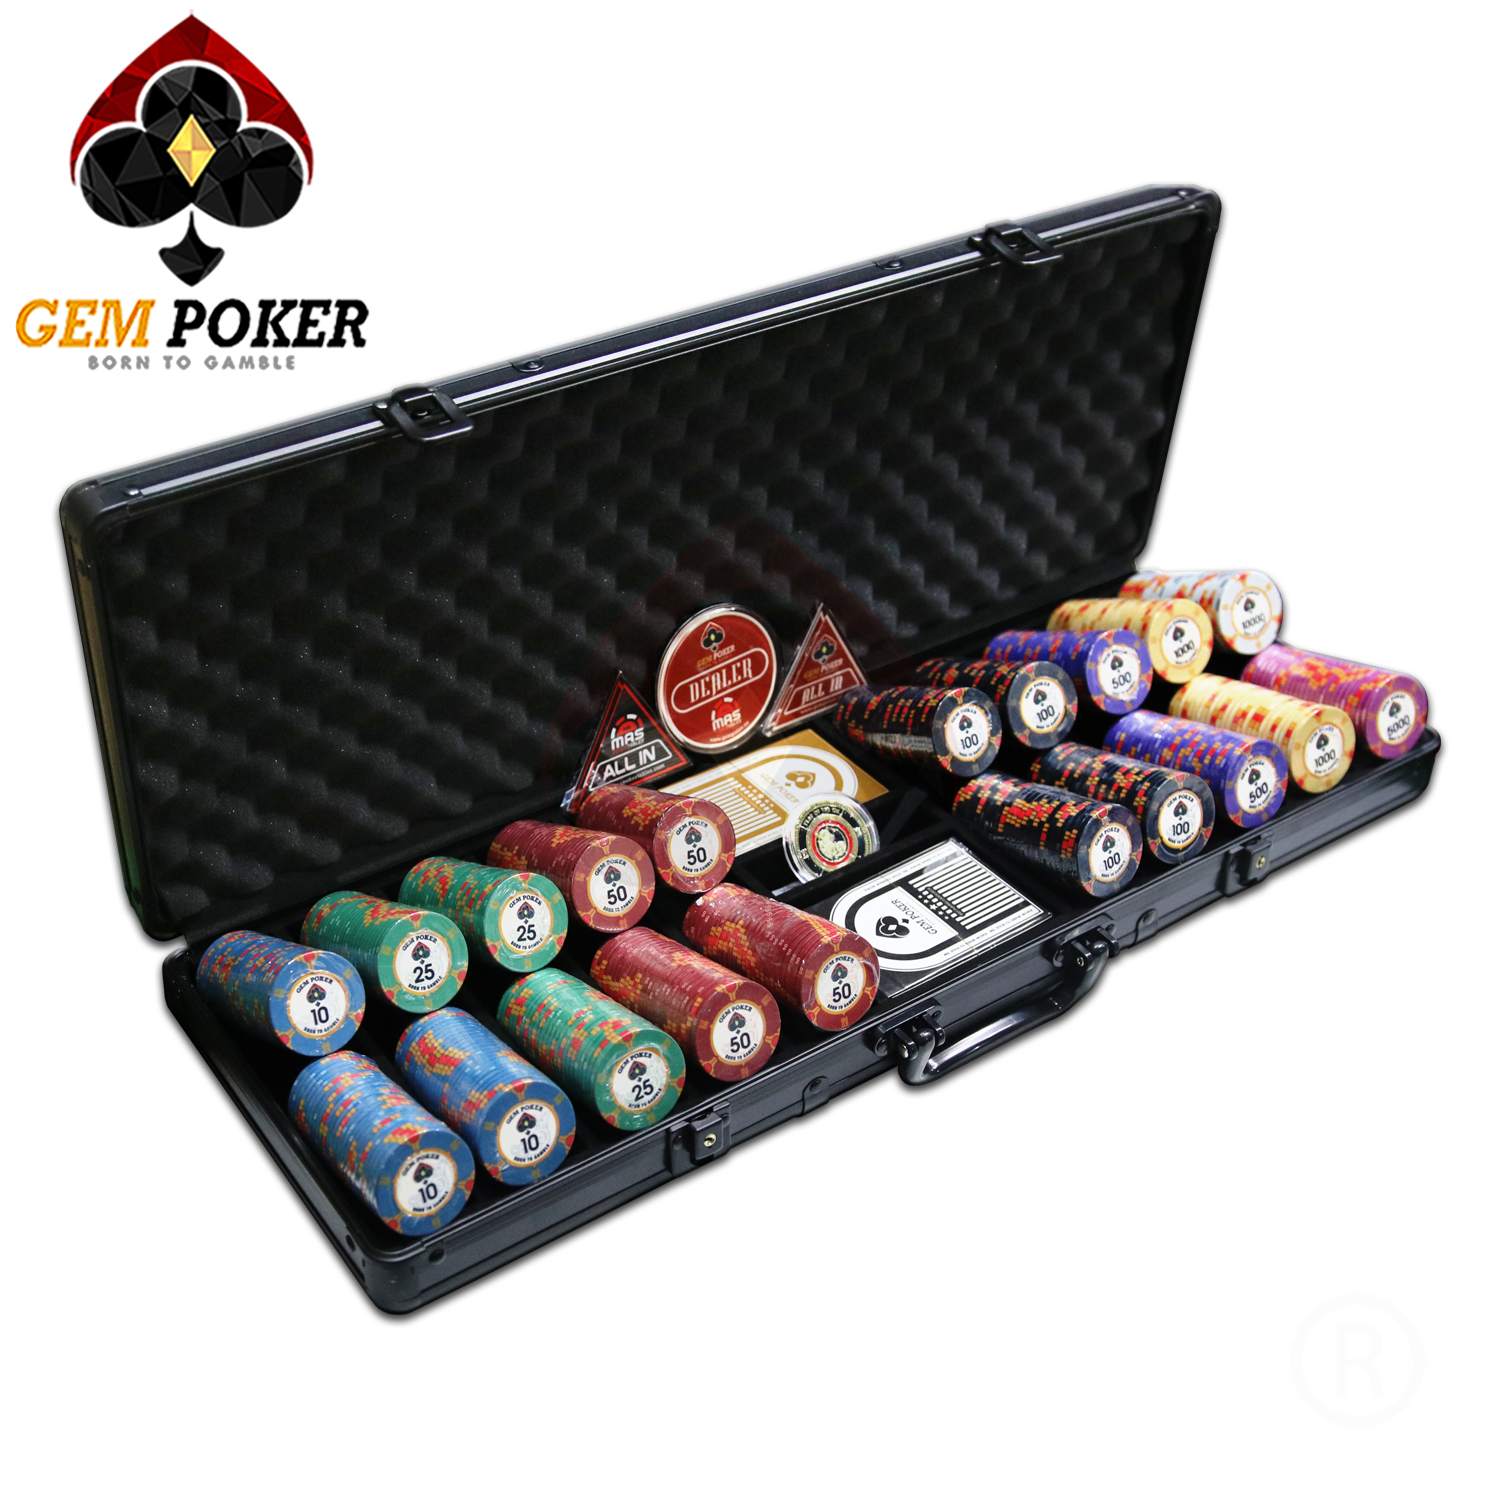 VALI 500 CHIP POKER SỨ CERAMIC YEAR OF THE OX